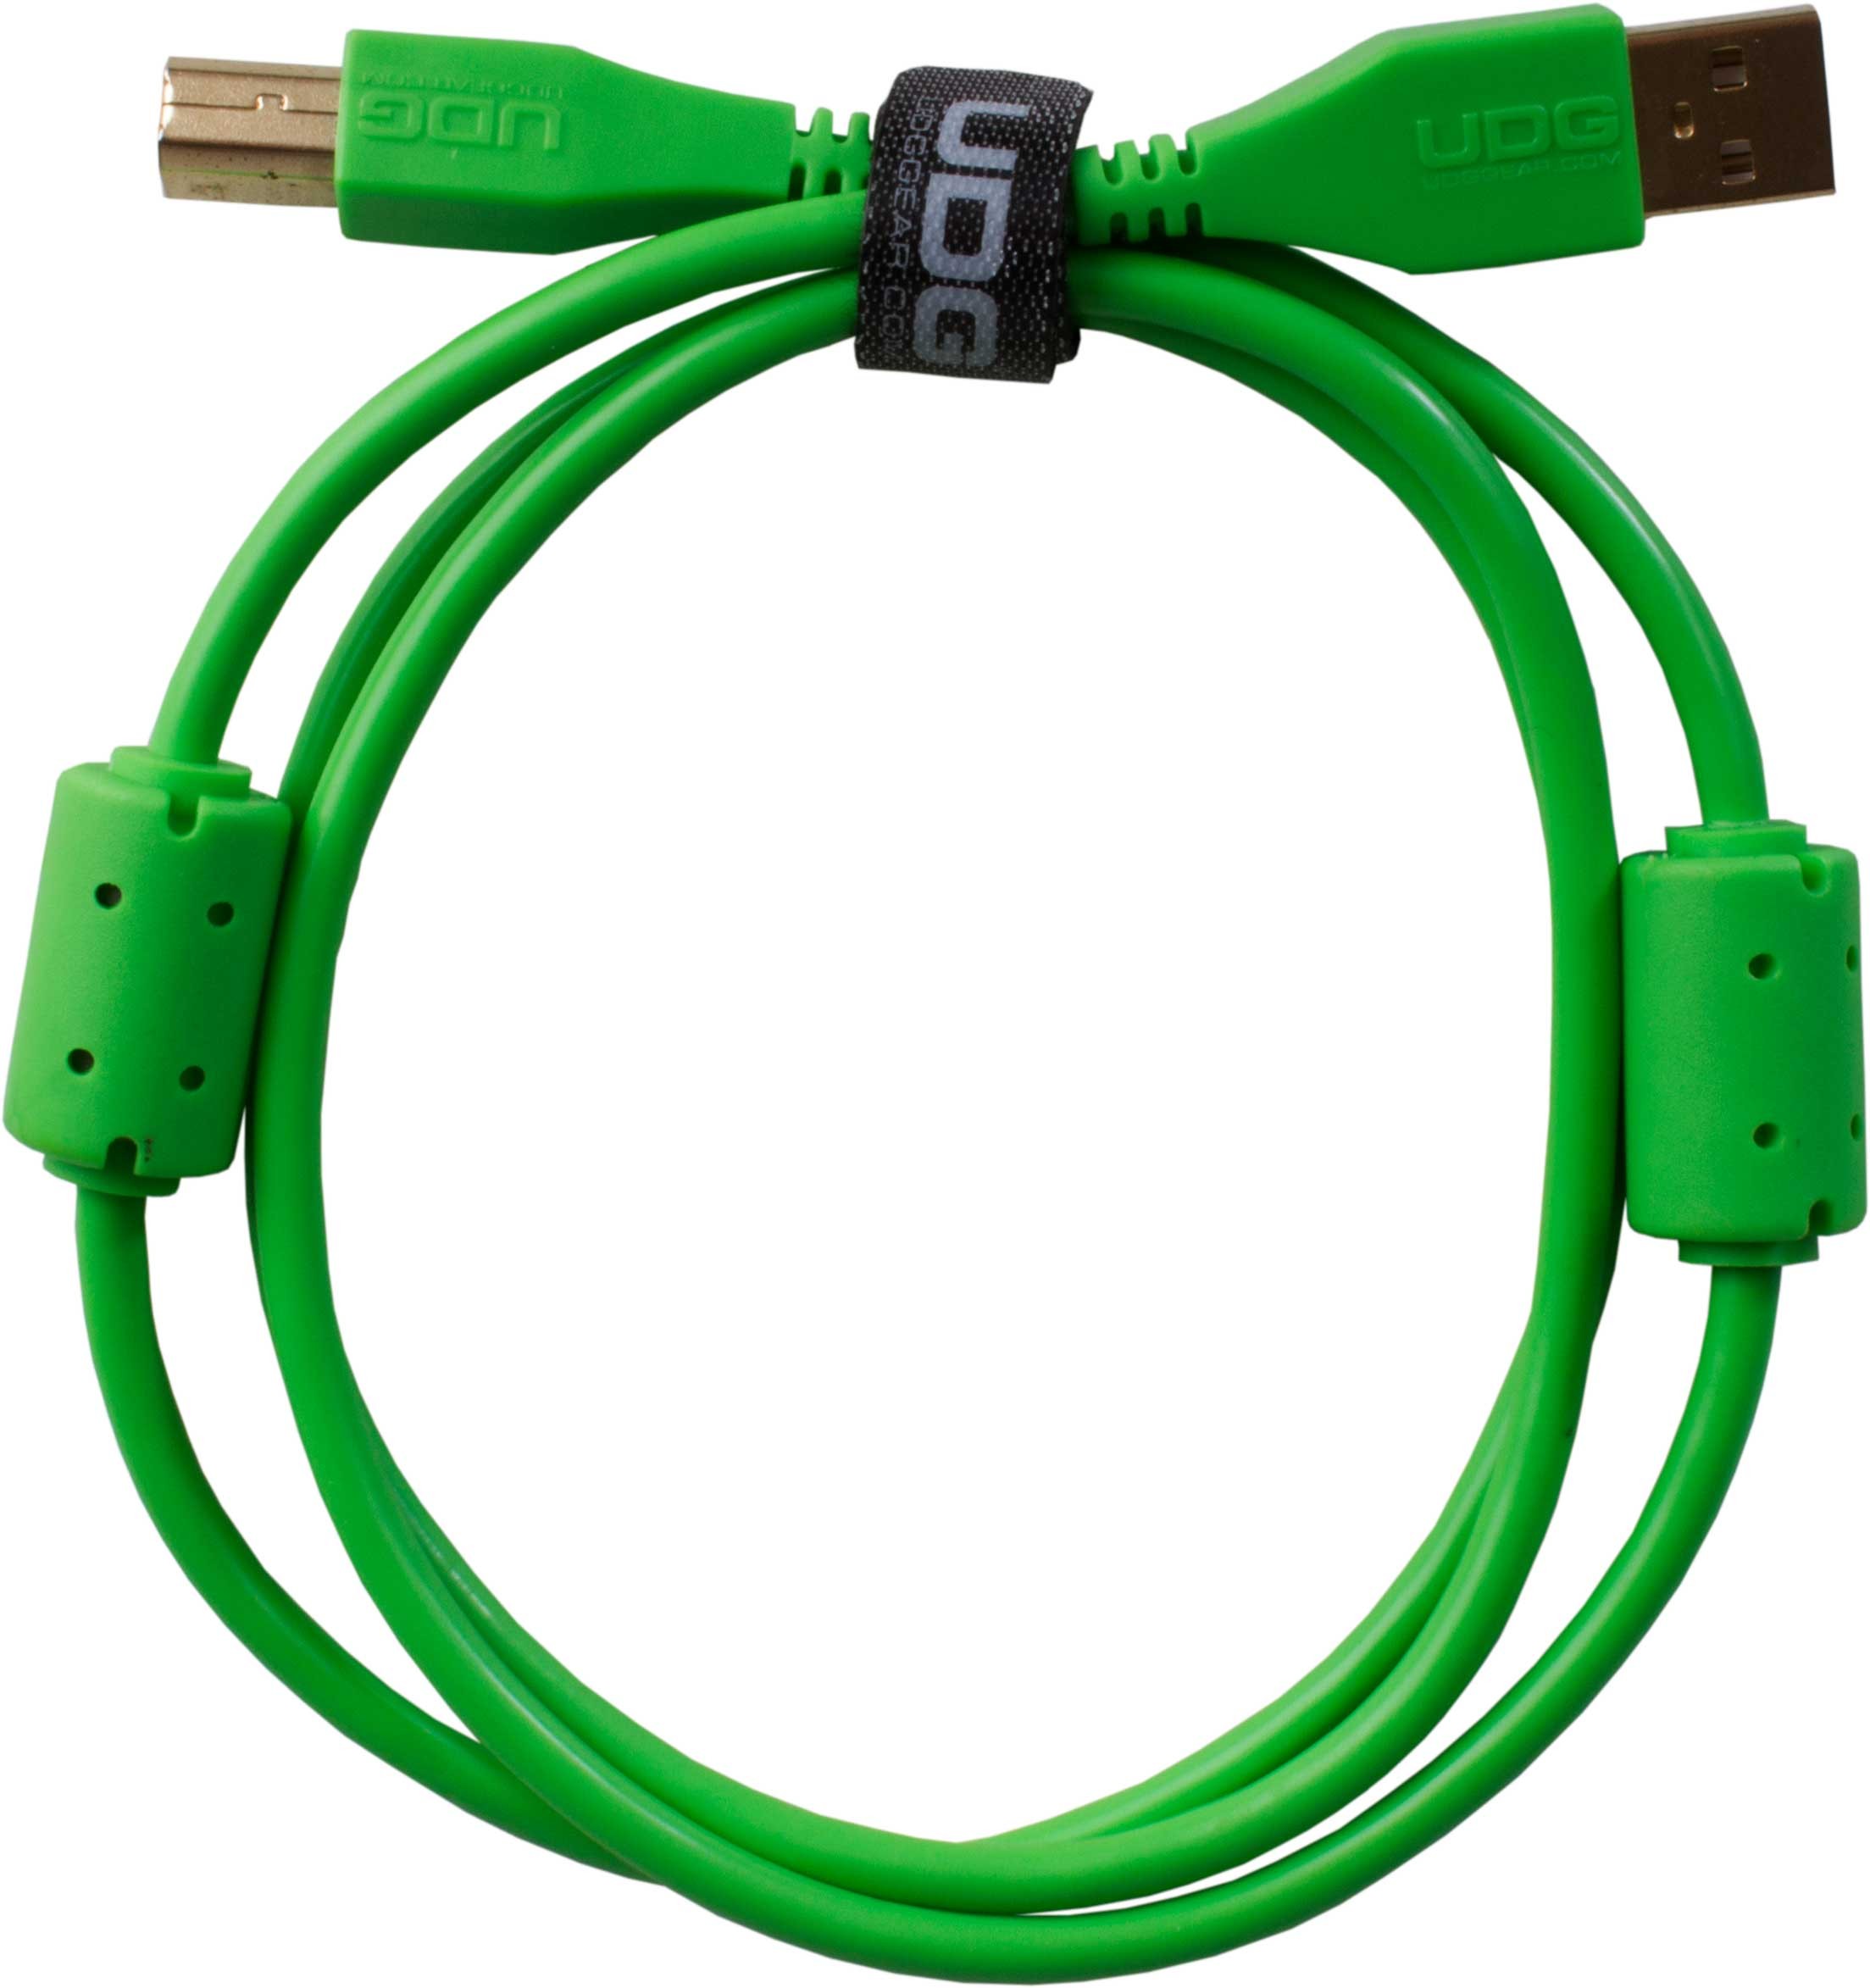 UDG U95002GR - ULTIMATE AUDIO CABLE USB 2.0 A-B GREEN STRAIGHT 2M